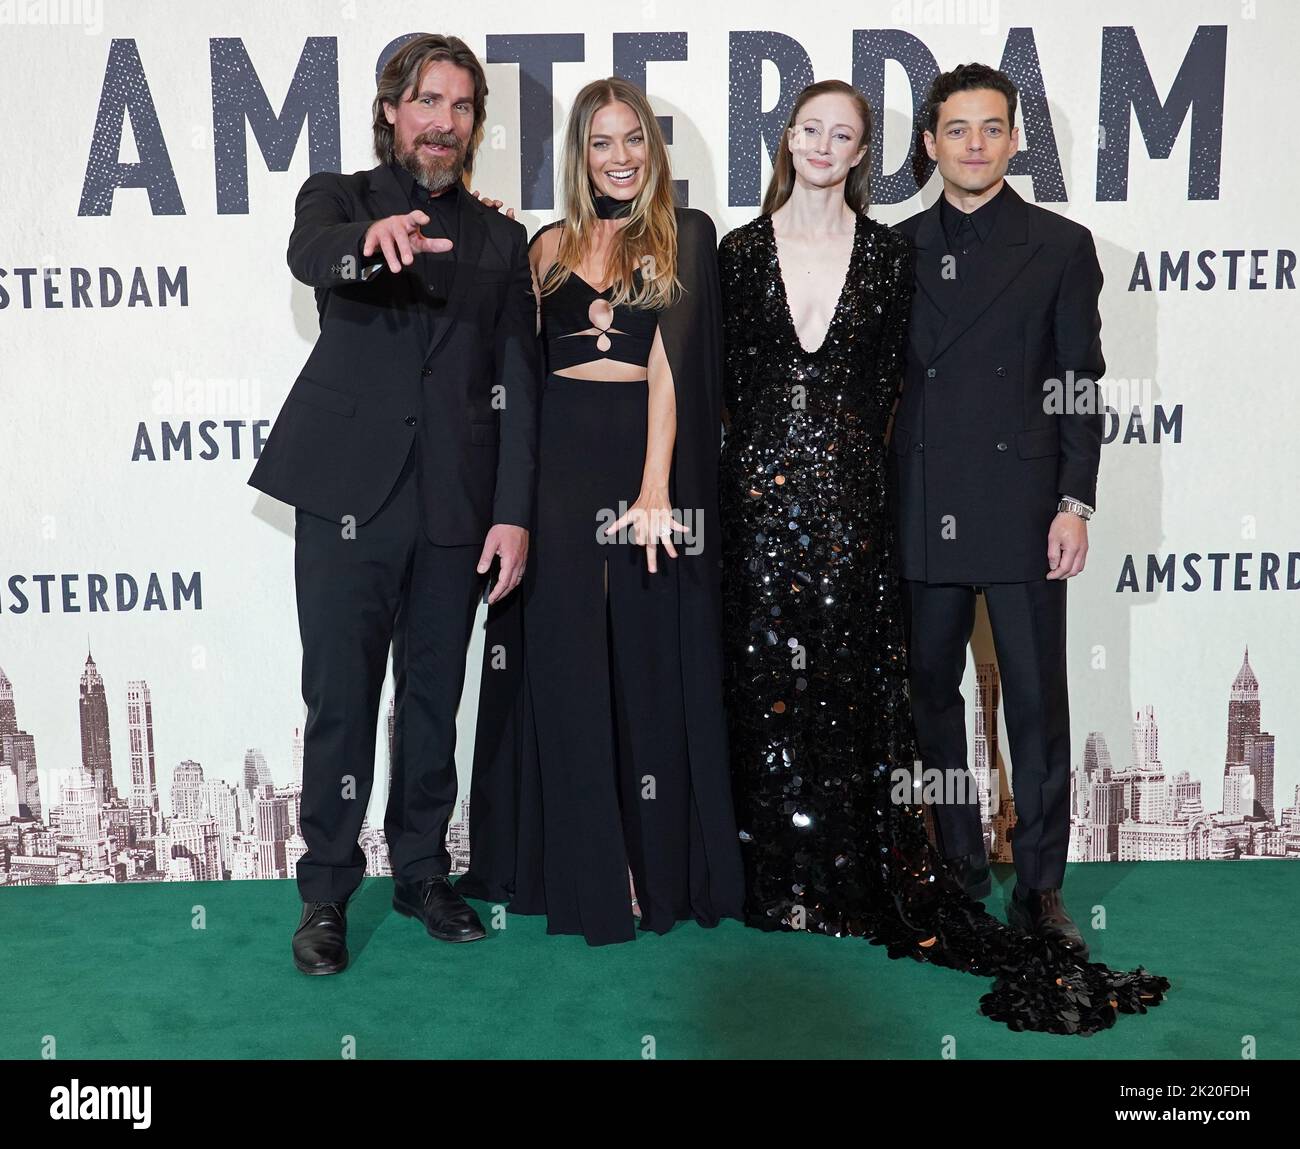 Christian Bale, Margot Robbie, Andrea Riseborough and Rami Malek attend the European premiere of Amsterdam at the Odeon Luxe Leicester Square, London. Picture date: Wednesday September 21, 2022. Stock Photo